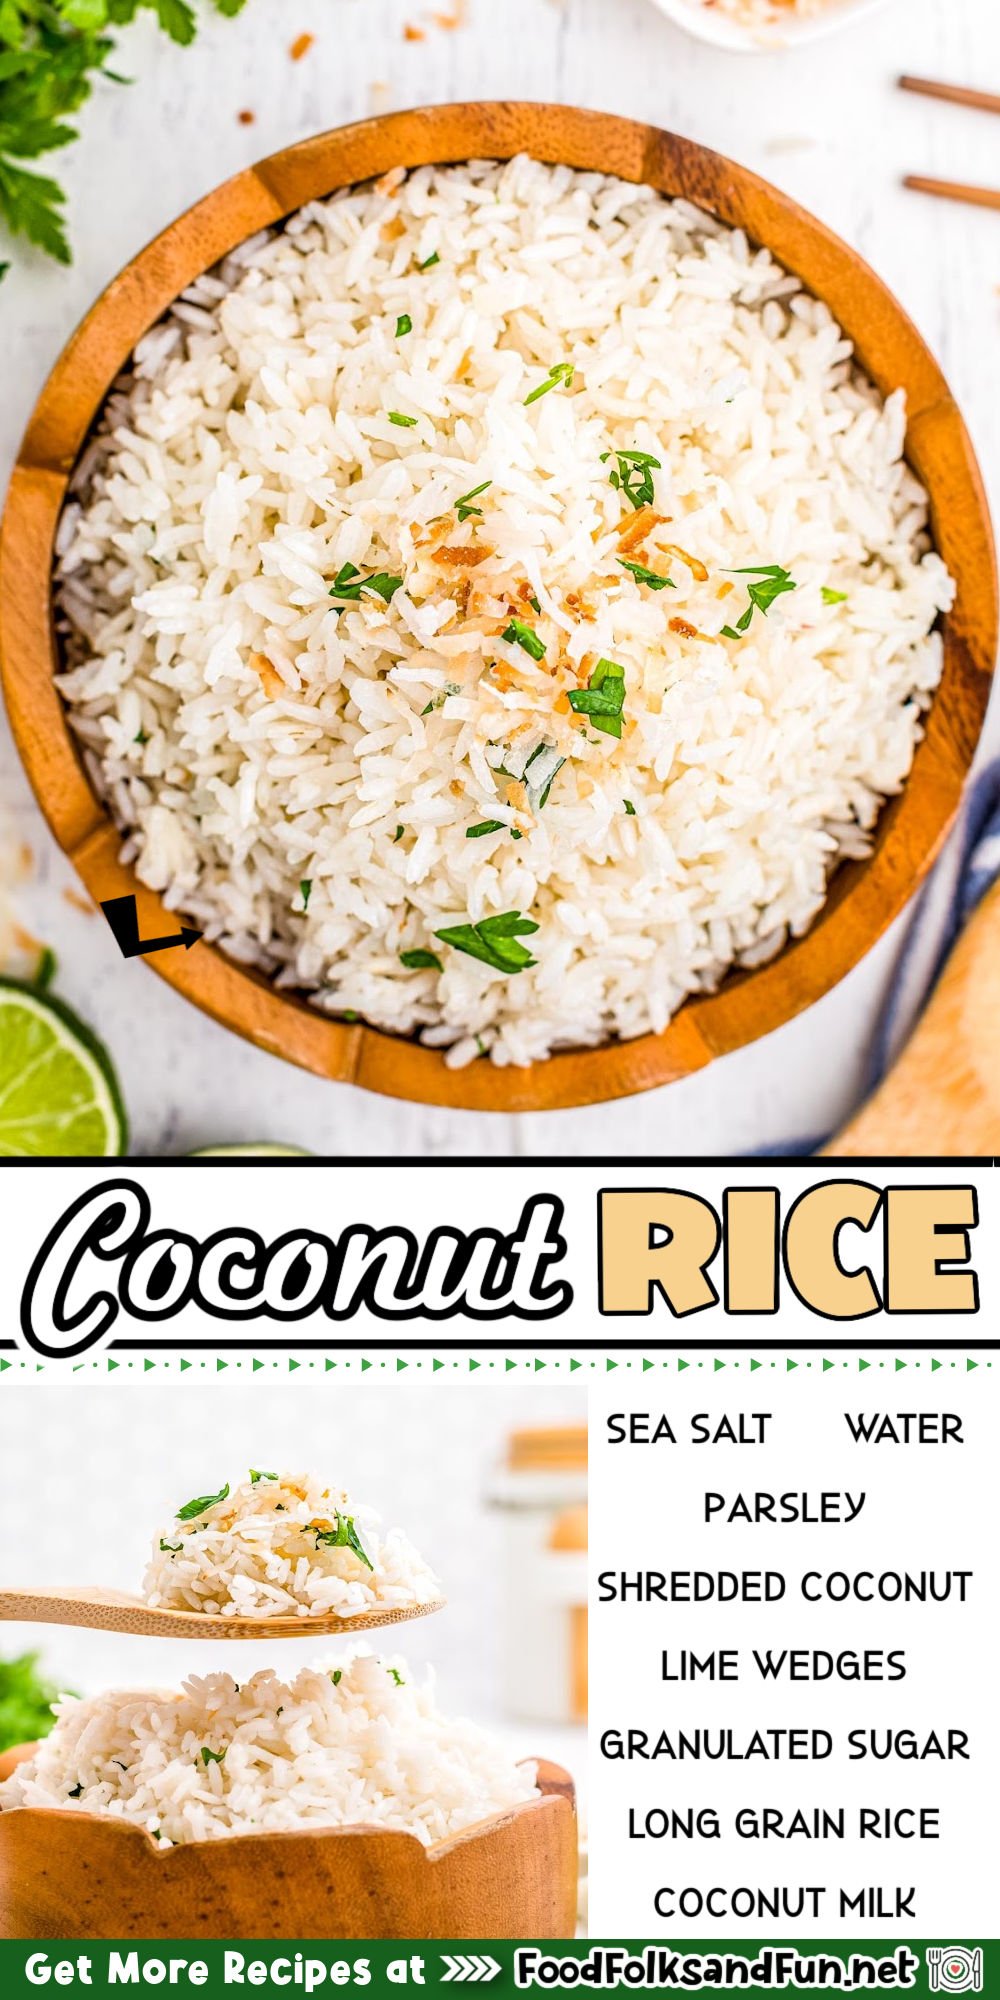 Coconut Rice is a savory side dish that is slightly sweet and creamy. It's great paired with chicken, fish, curries, and stir frys. via @foodfolksandfun